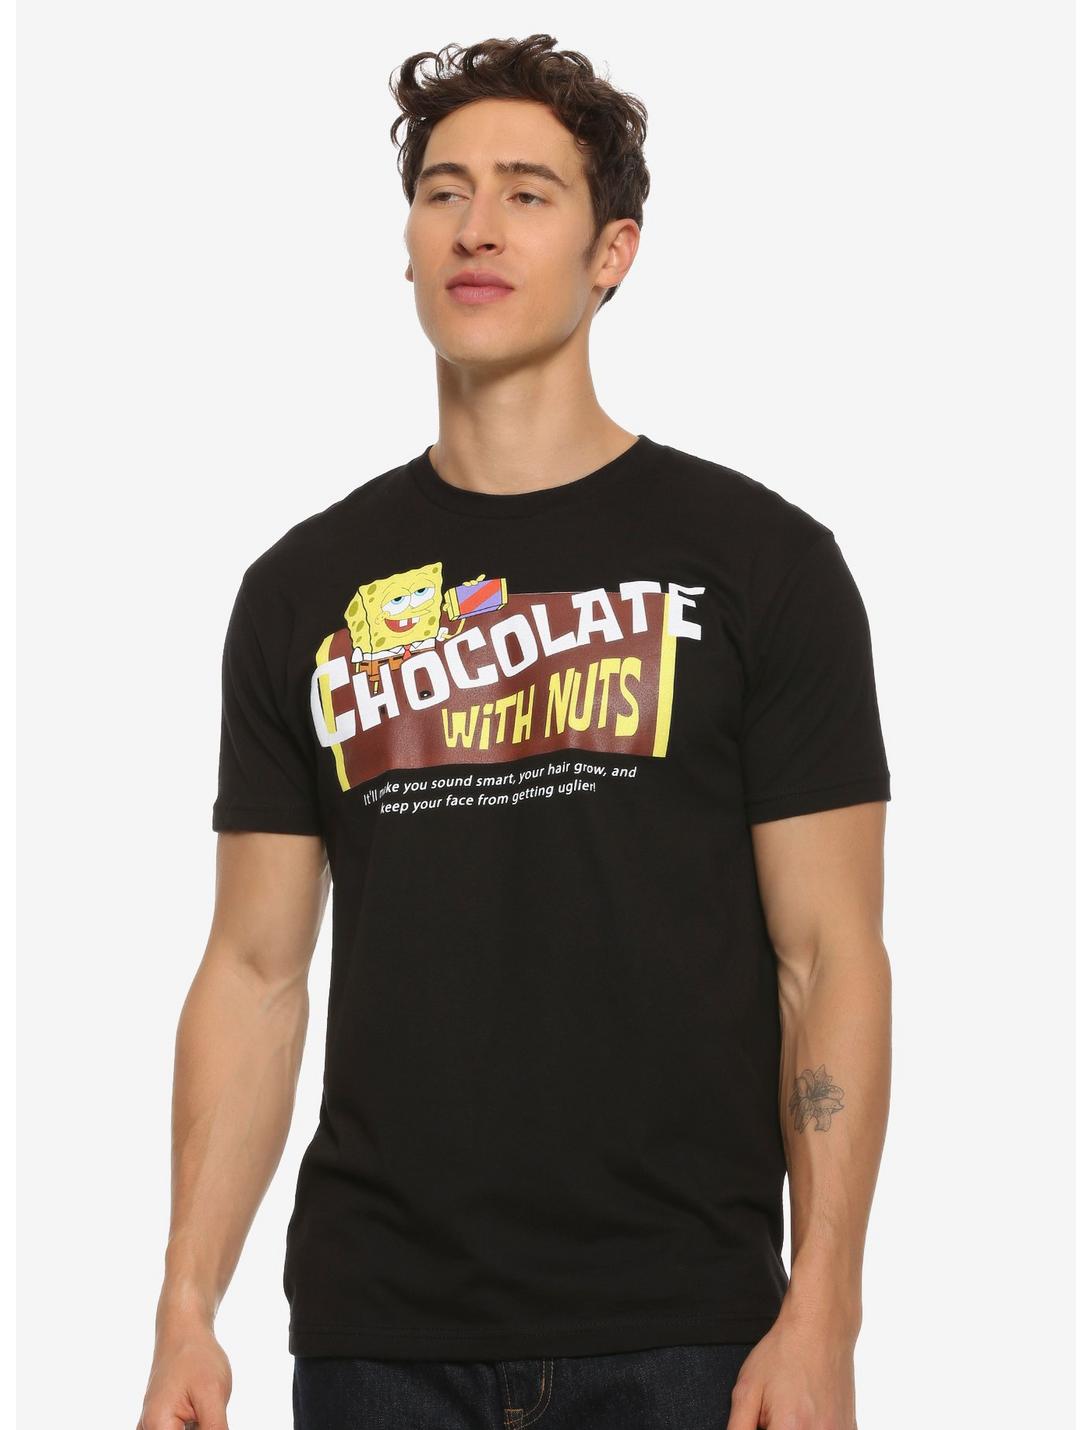 SpongeBob SquarePants Chocolate with Nuts T-Shirt - BoxLunch Exclusive, BLACK, hi-res